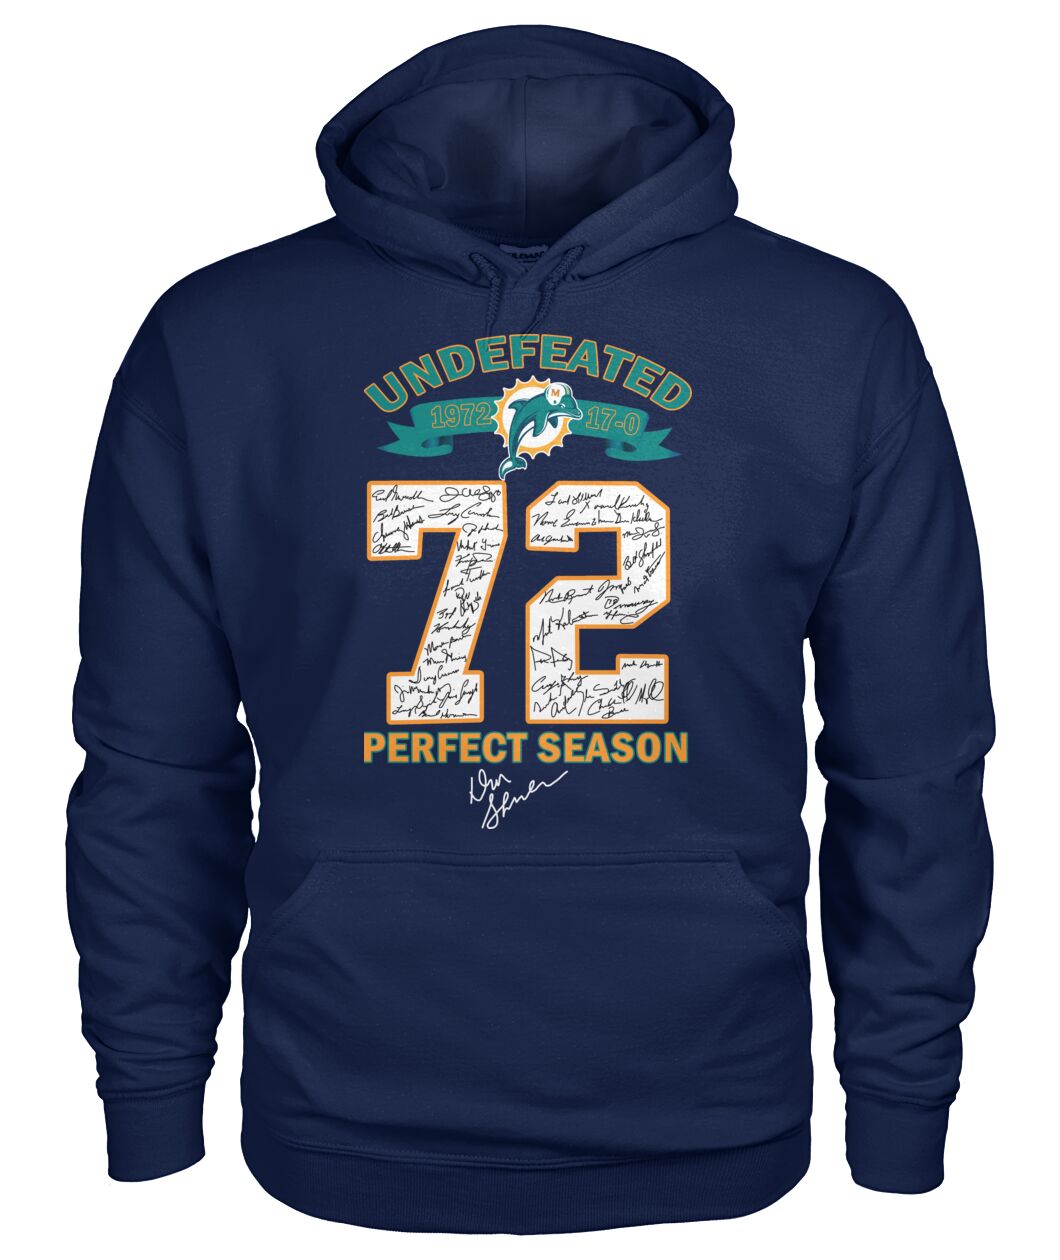 Miami Dolphins Undefeated 72 perfect season shirt 13